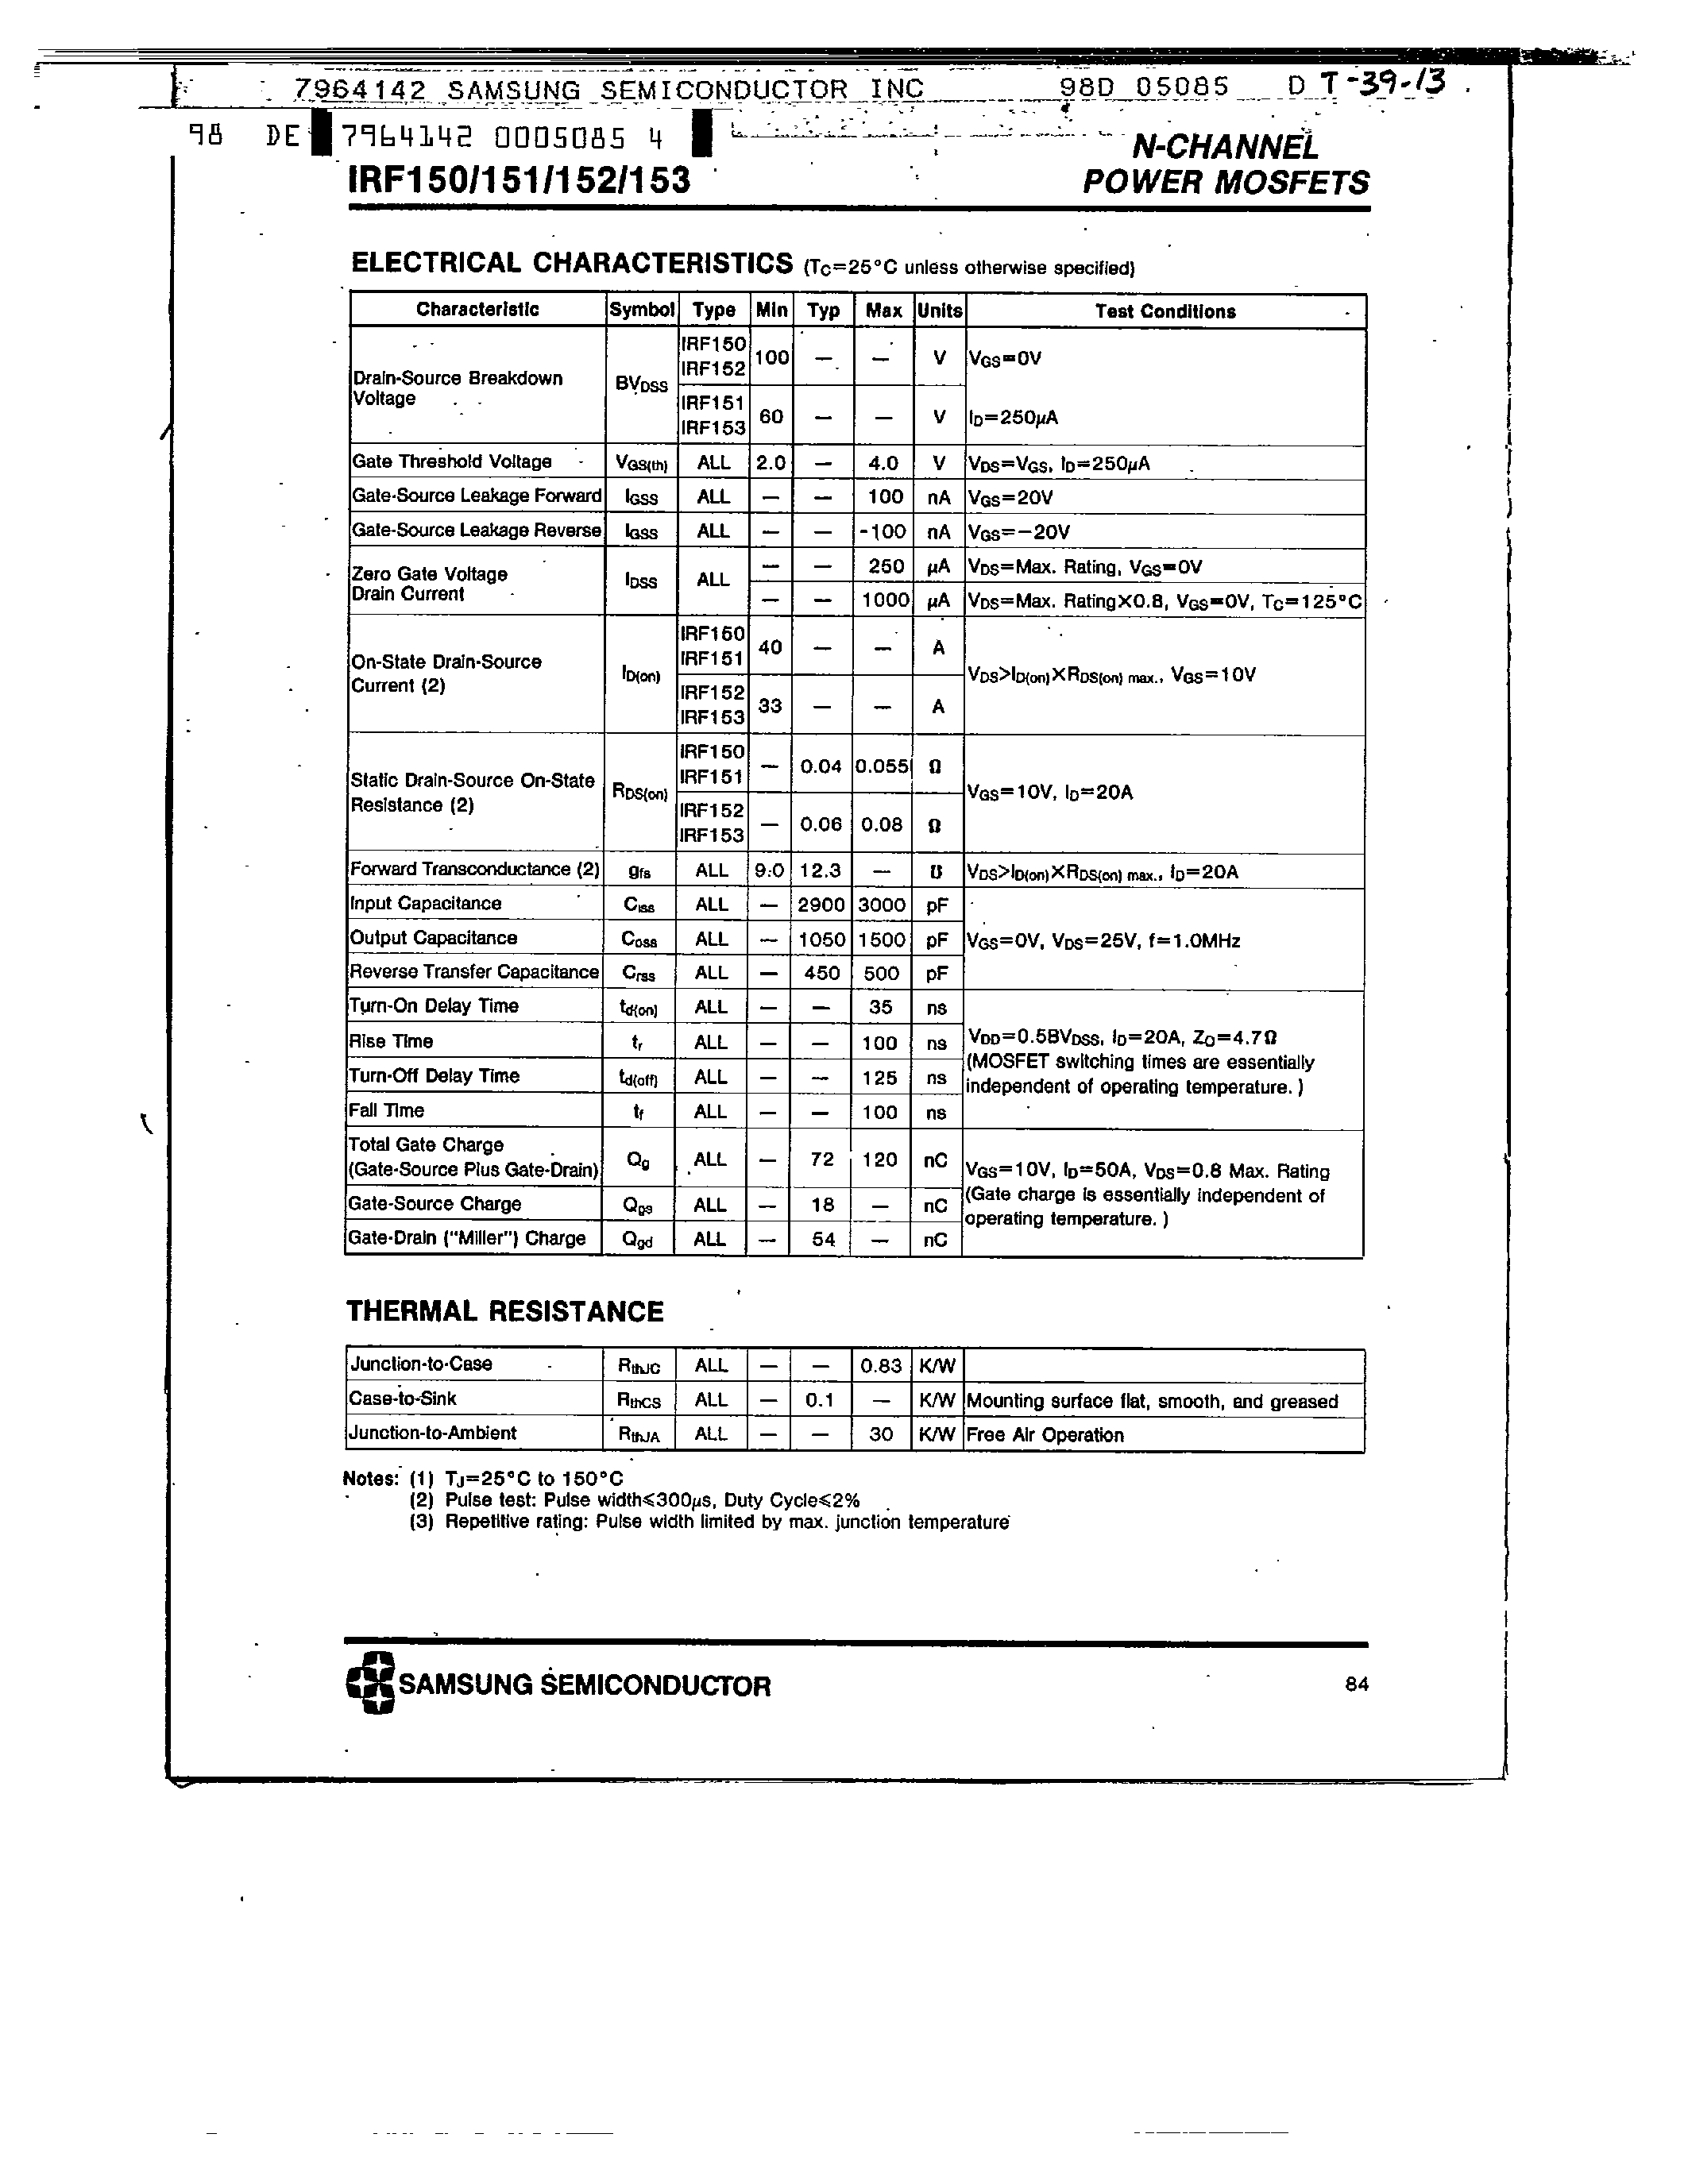 Datasheet IRF150 - N-CHANNEL POWER MOSFETS page 2